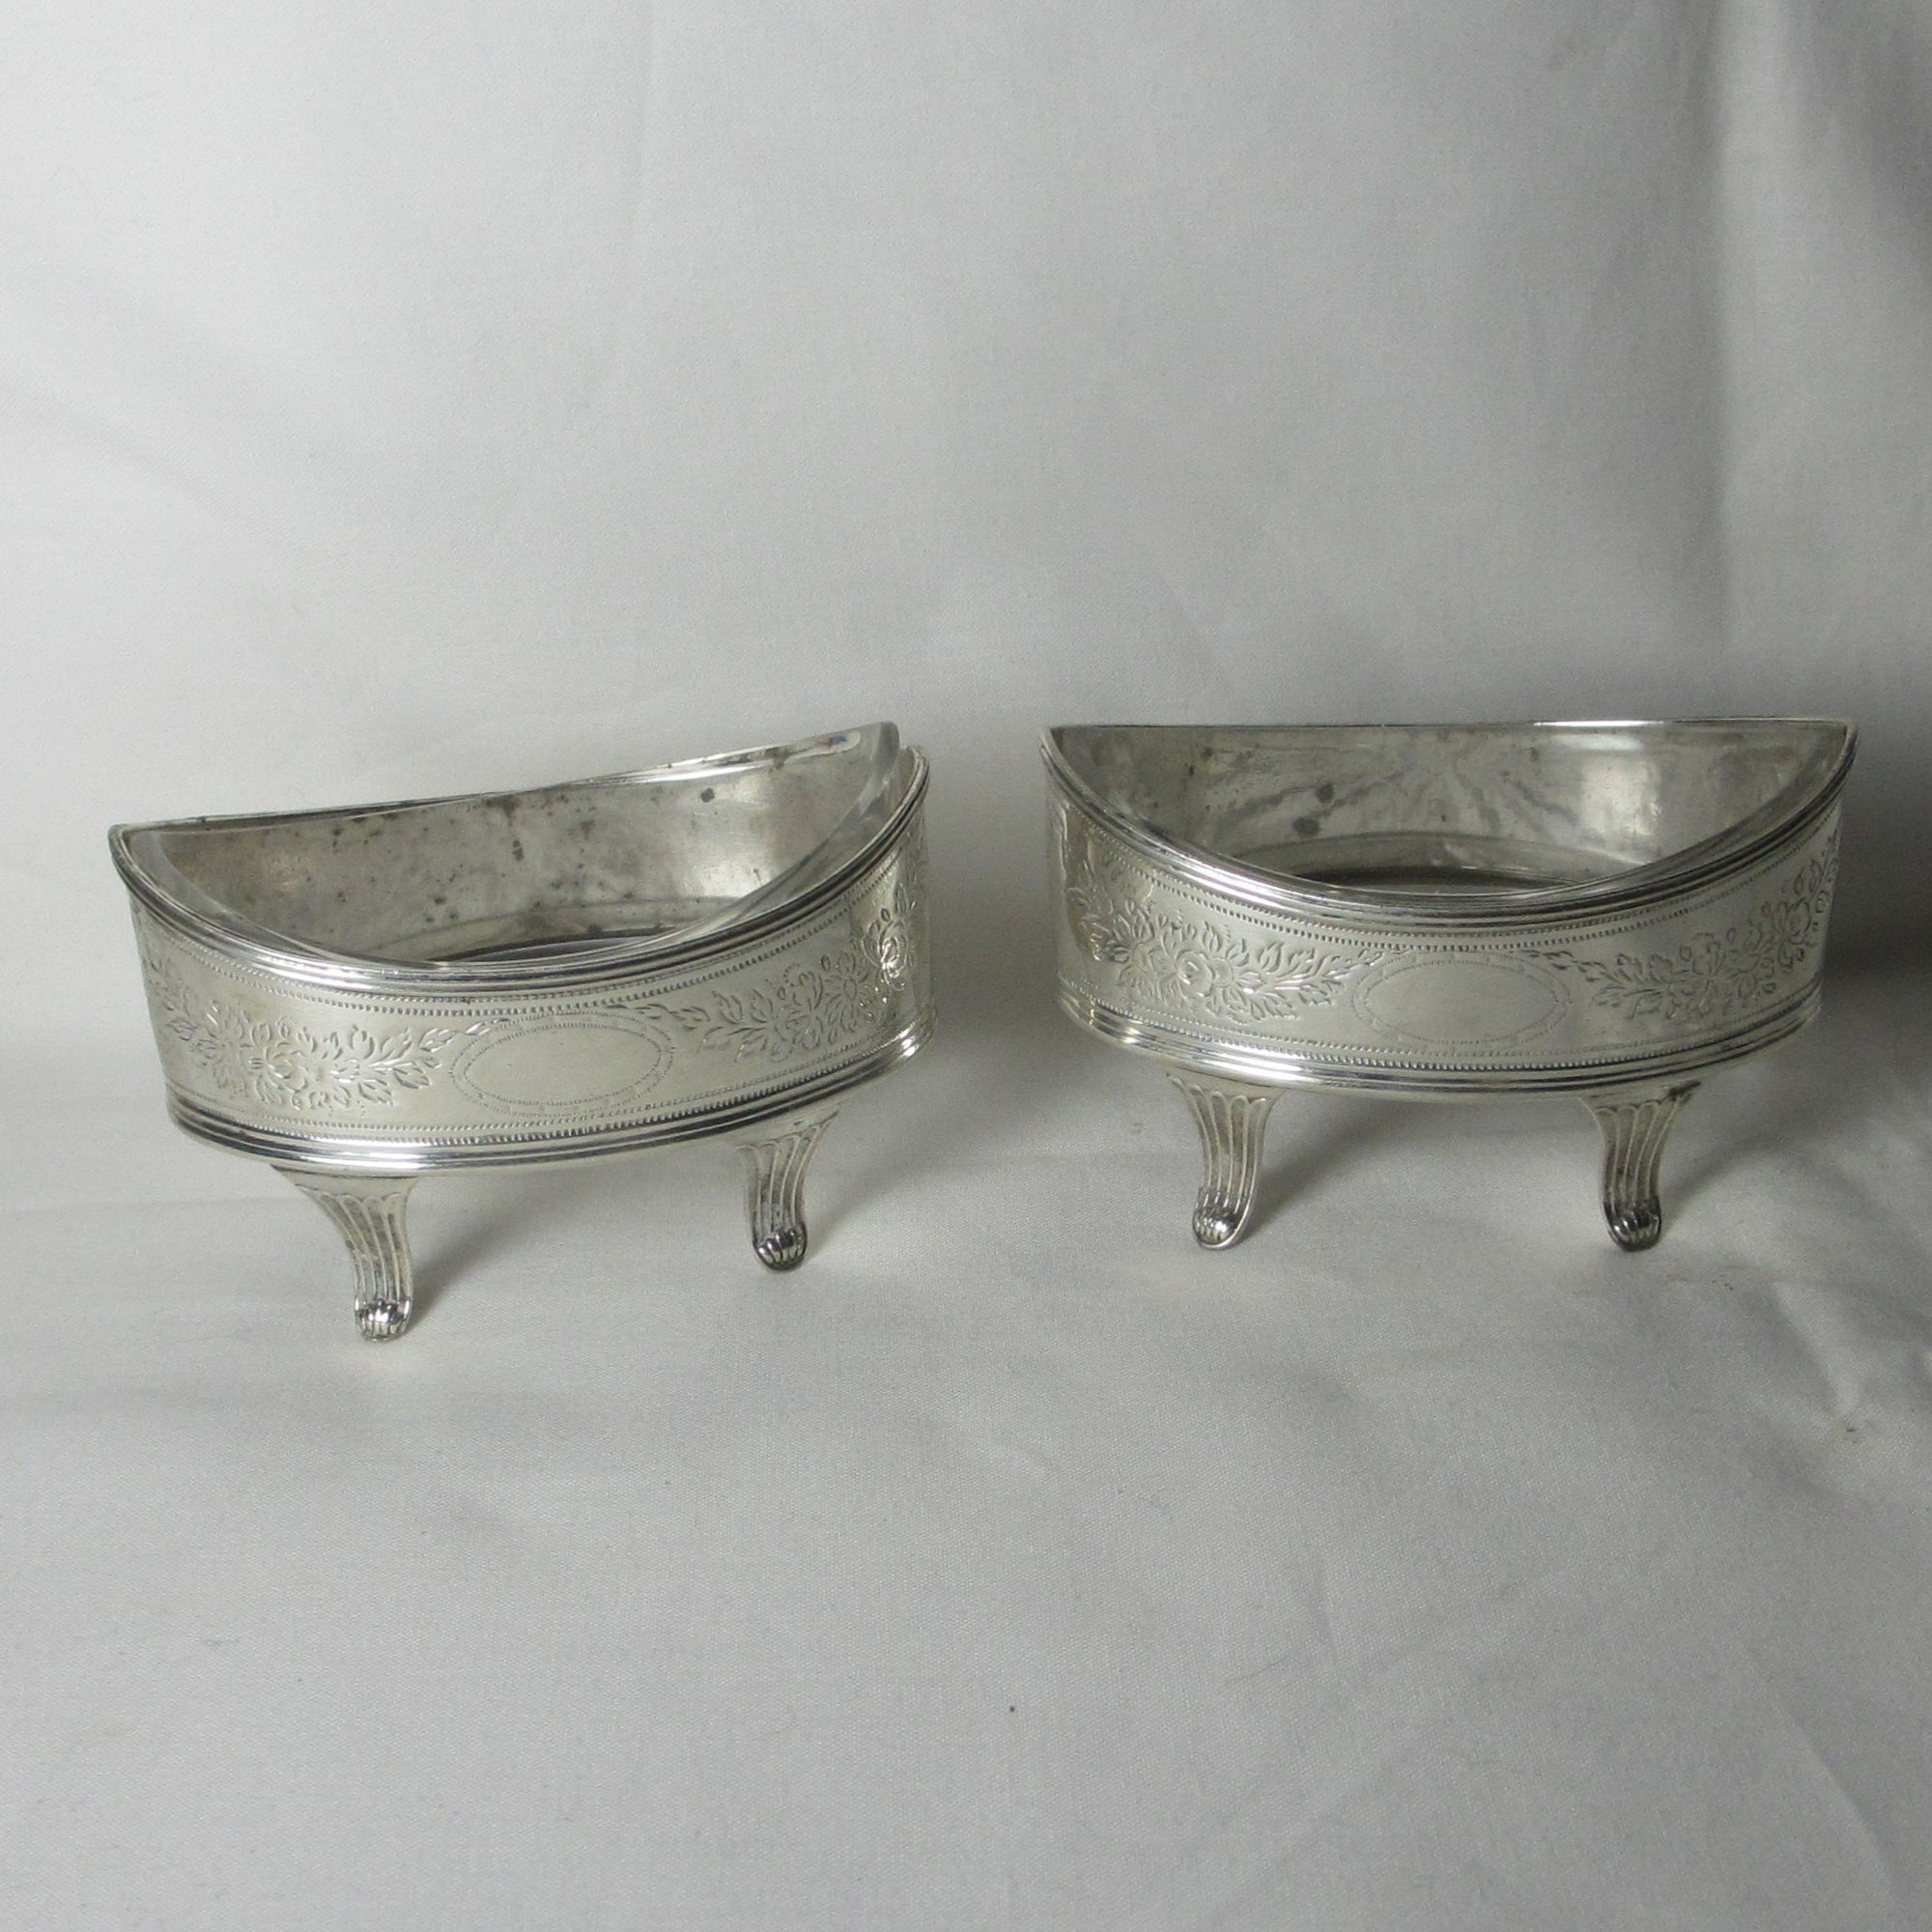 Pair of English Sterling Silver and Cut Glass Table Salts by Walter Brind Antique Georgian